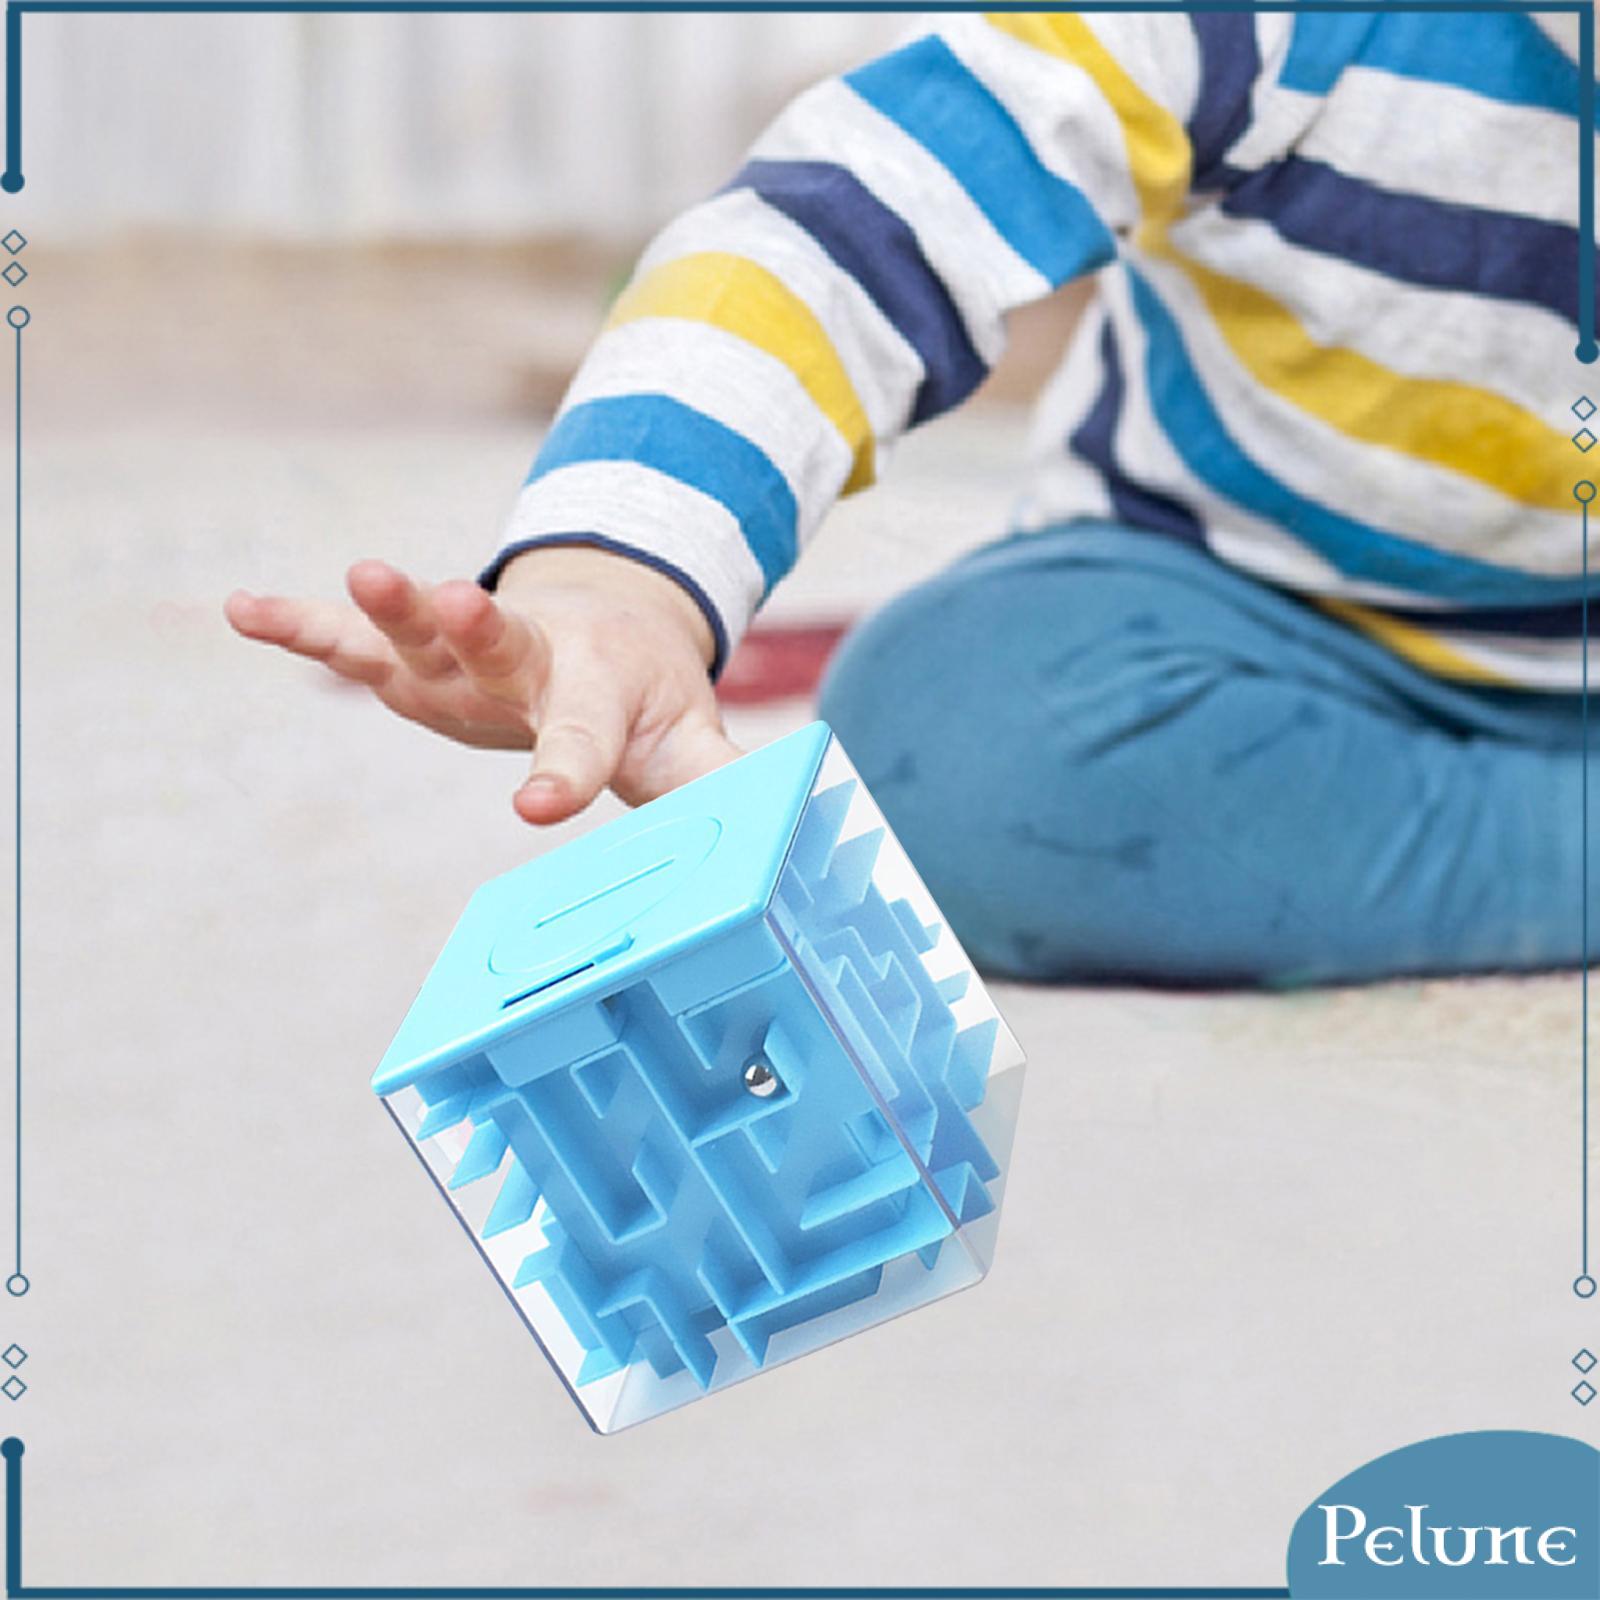 Pelune Puzzles Cube Game Family Game Educational Toy for Adults Children